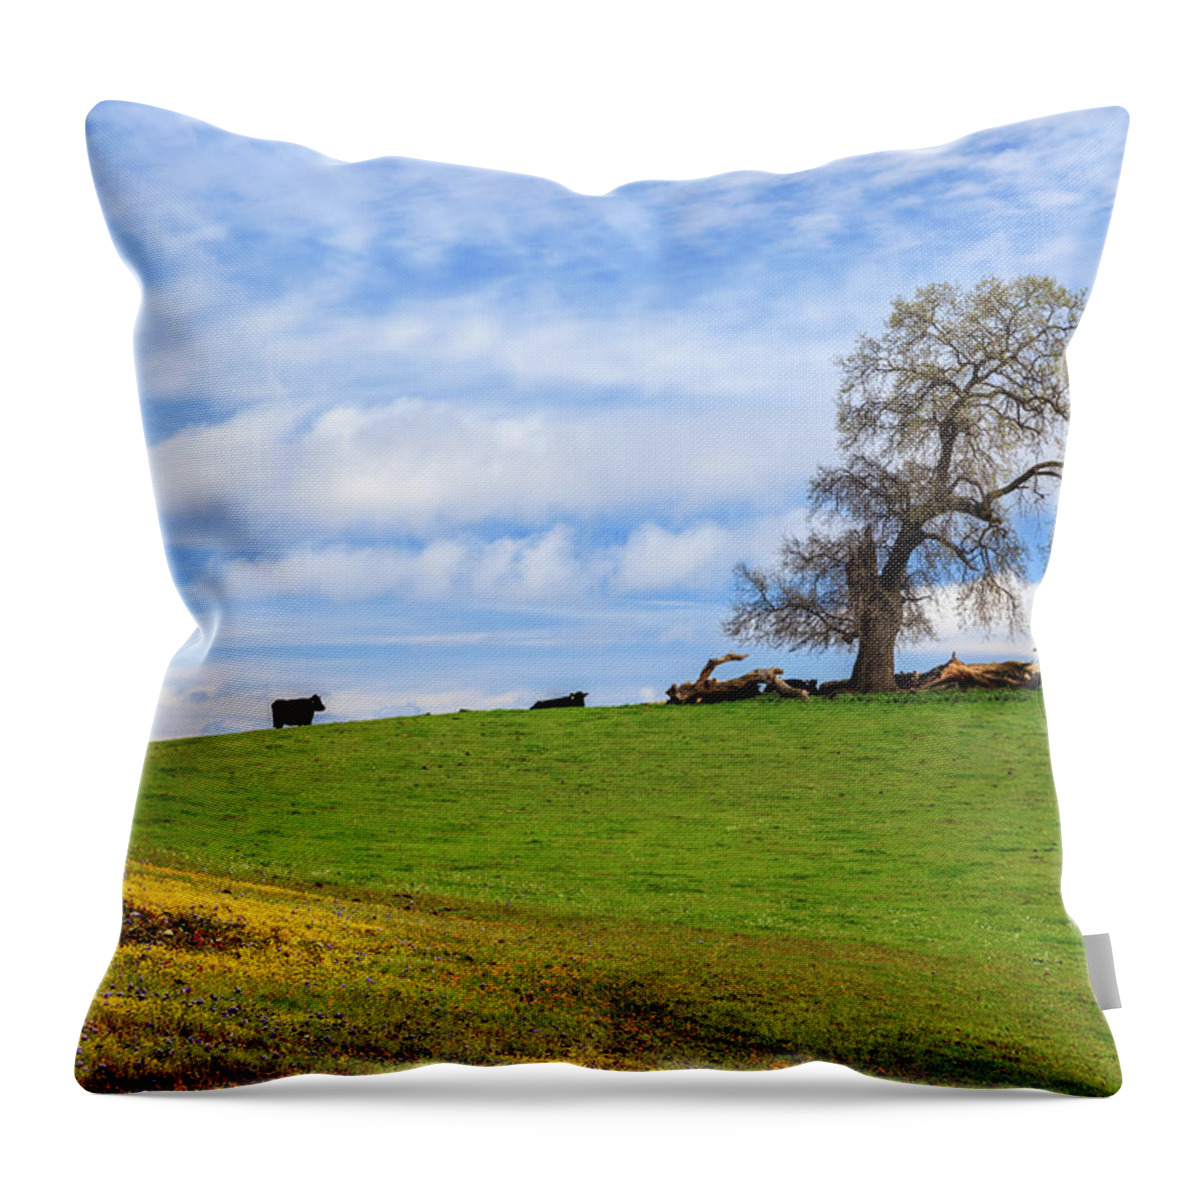 Cows Throw Pillow featuring the photograph Cows On A Spring Hill by James Eddy